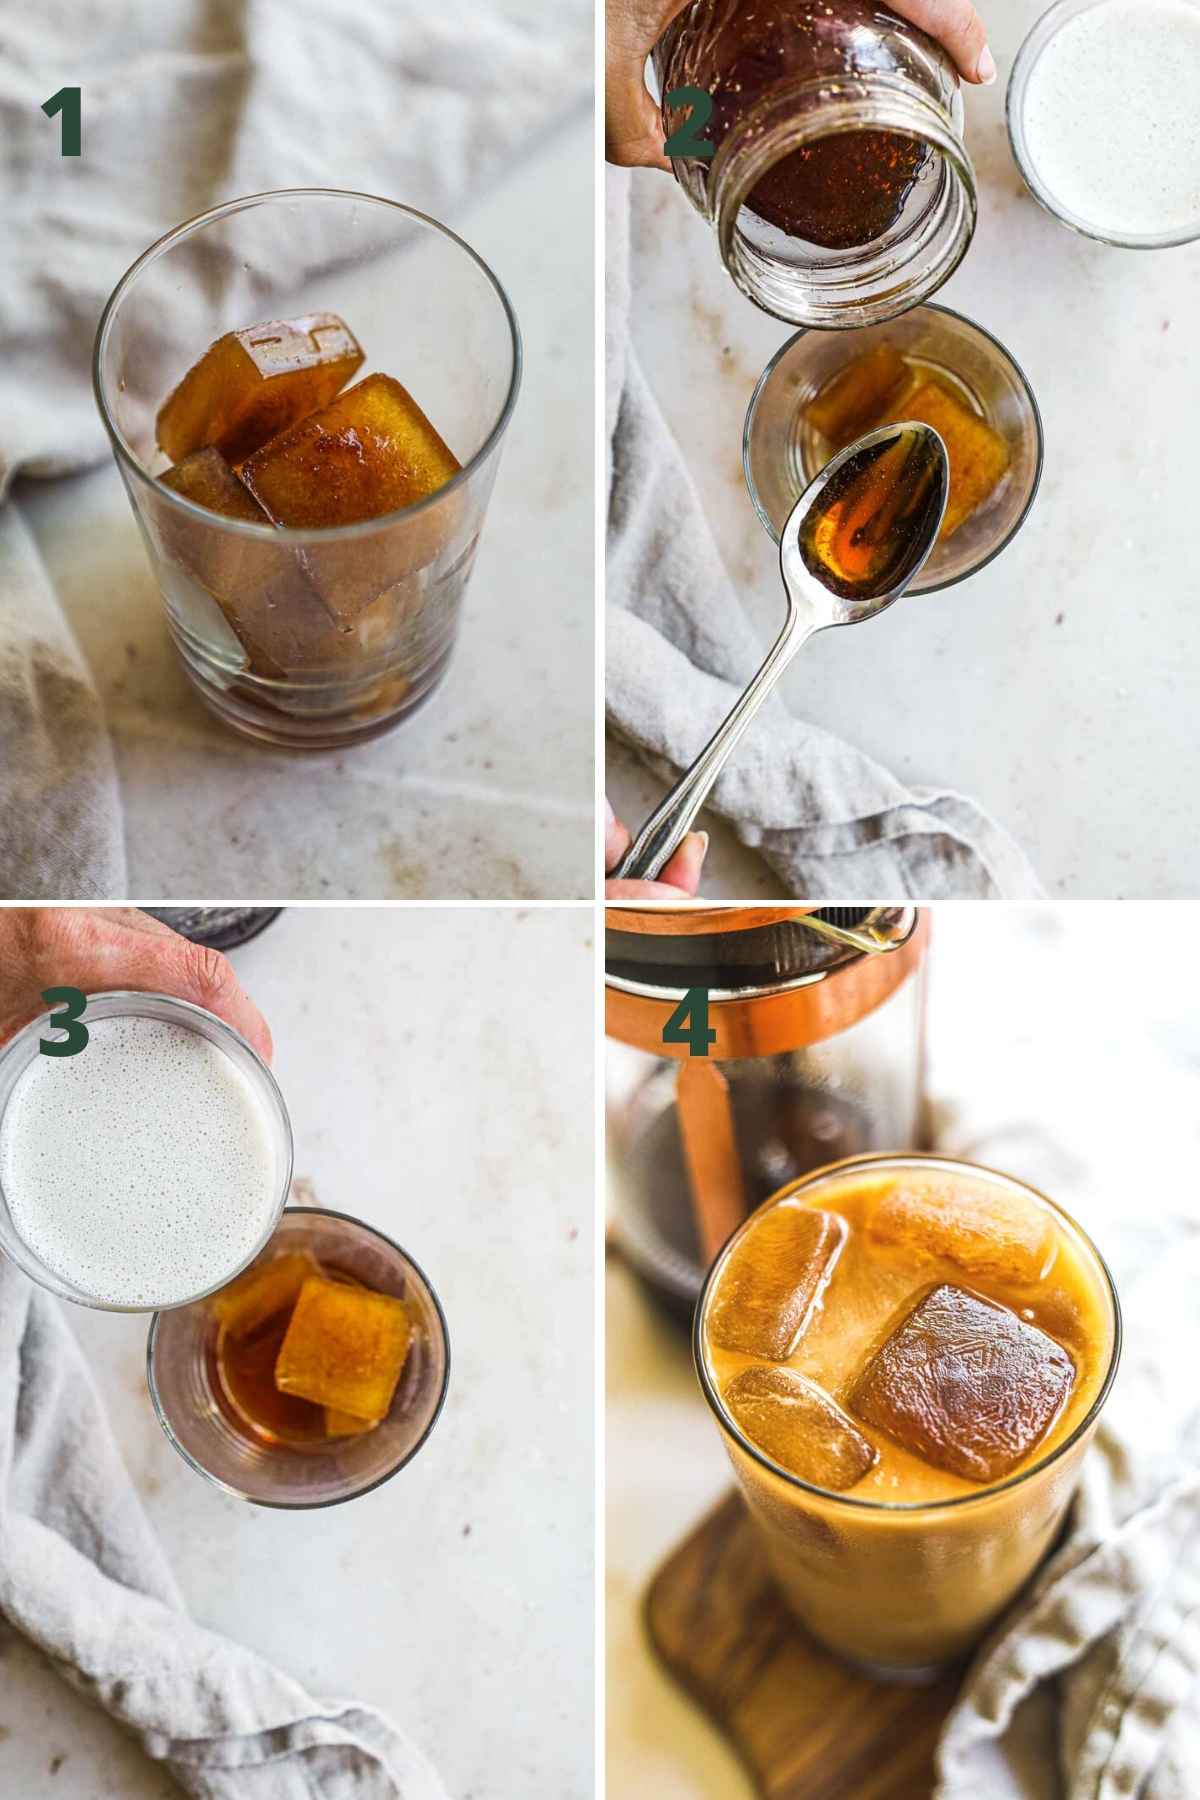 Steps to make caramel iced coffee, including adding the coffee ice cubes, pouring the caramel syrup, adding the milk, and stirring.